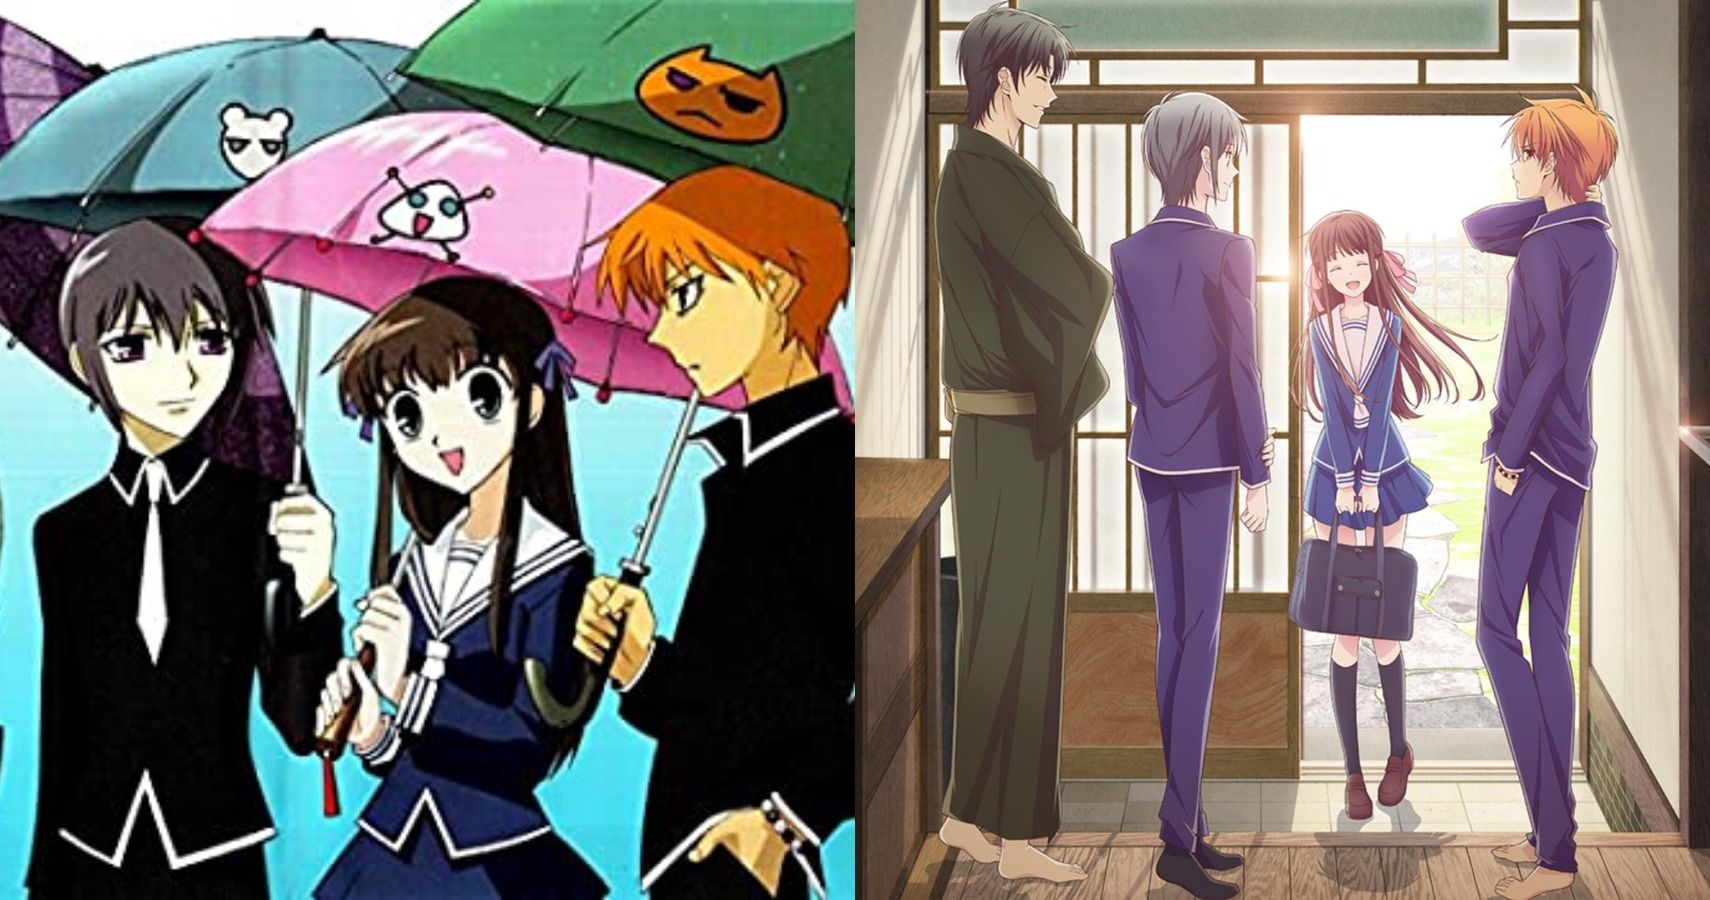 FRUITS BASKET REBOOT 2019 2001 ANIME CHARACTER COMPARISON! AYAME